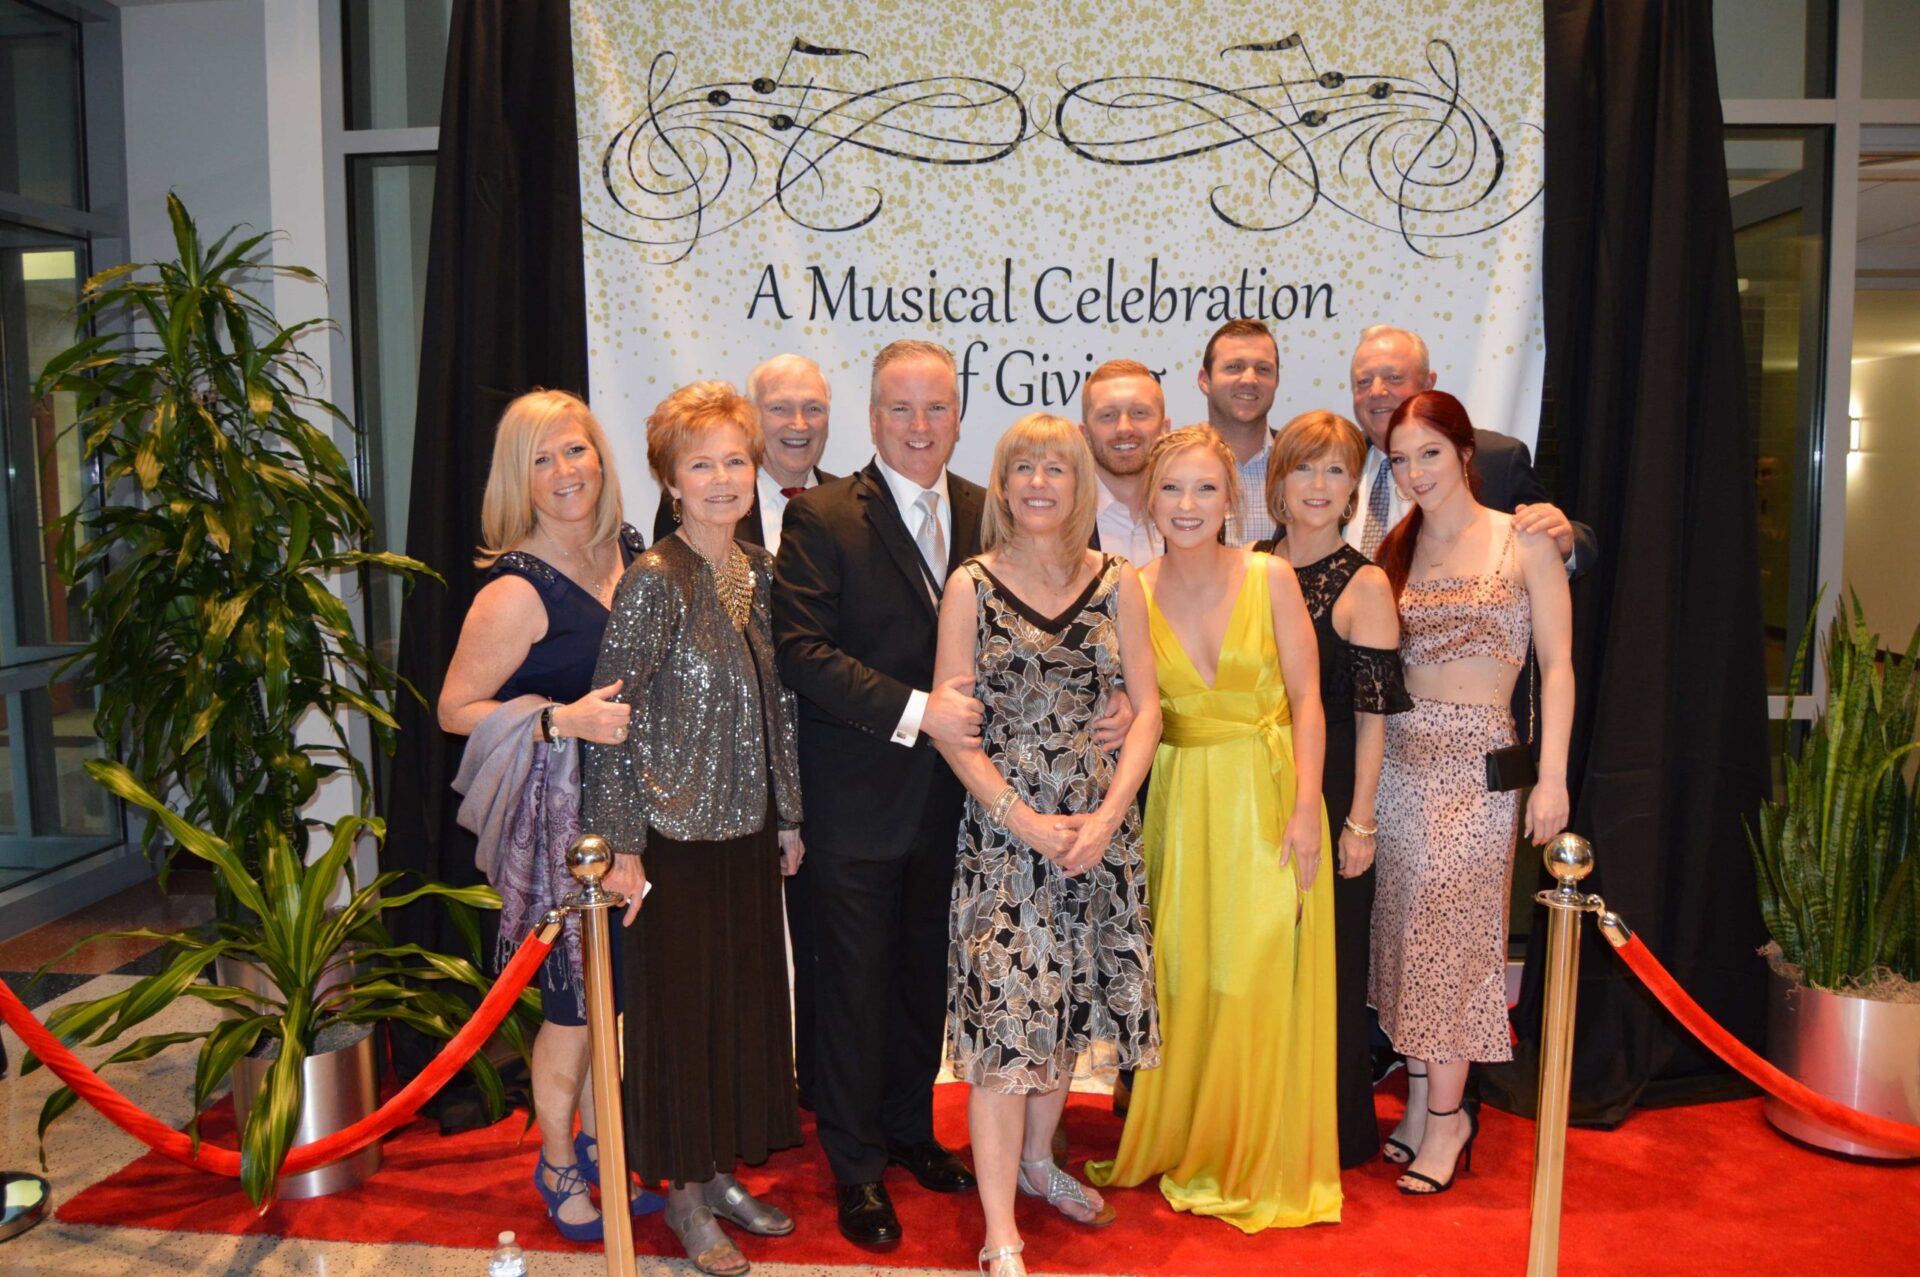 Bev and her family at Musical event